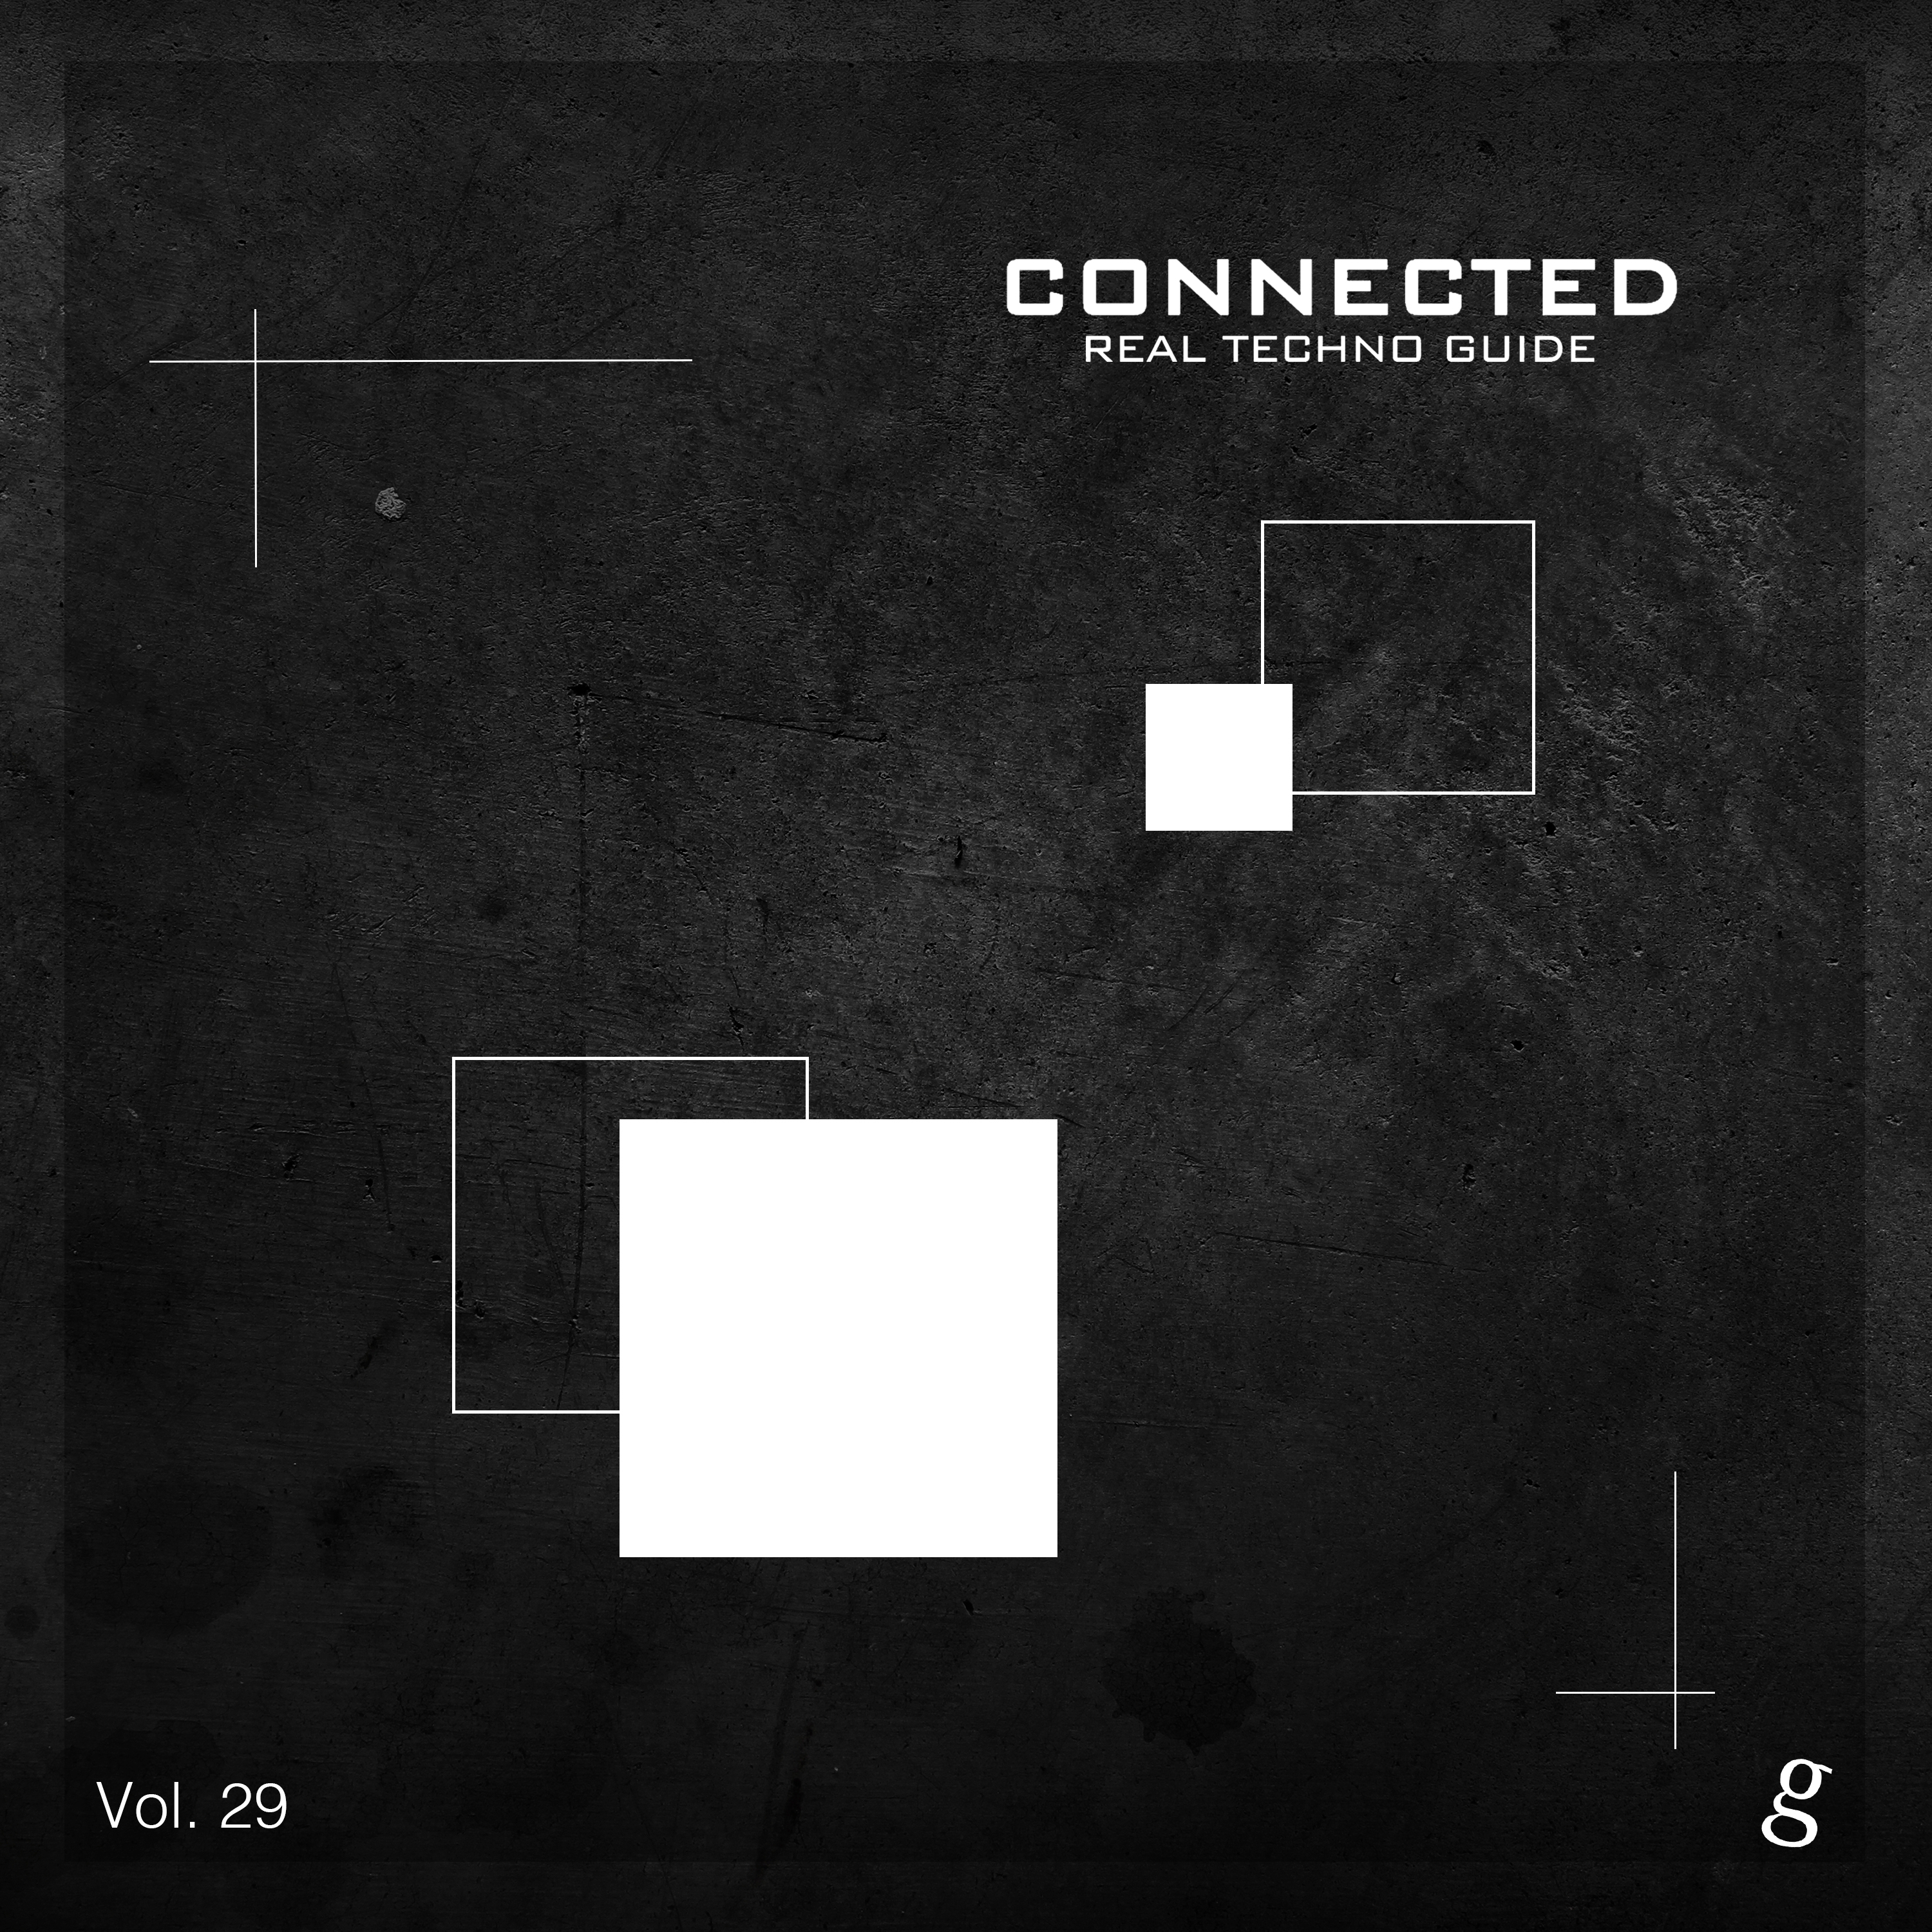 Connected, Vol. 29 - Real Techno Guide